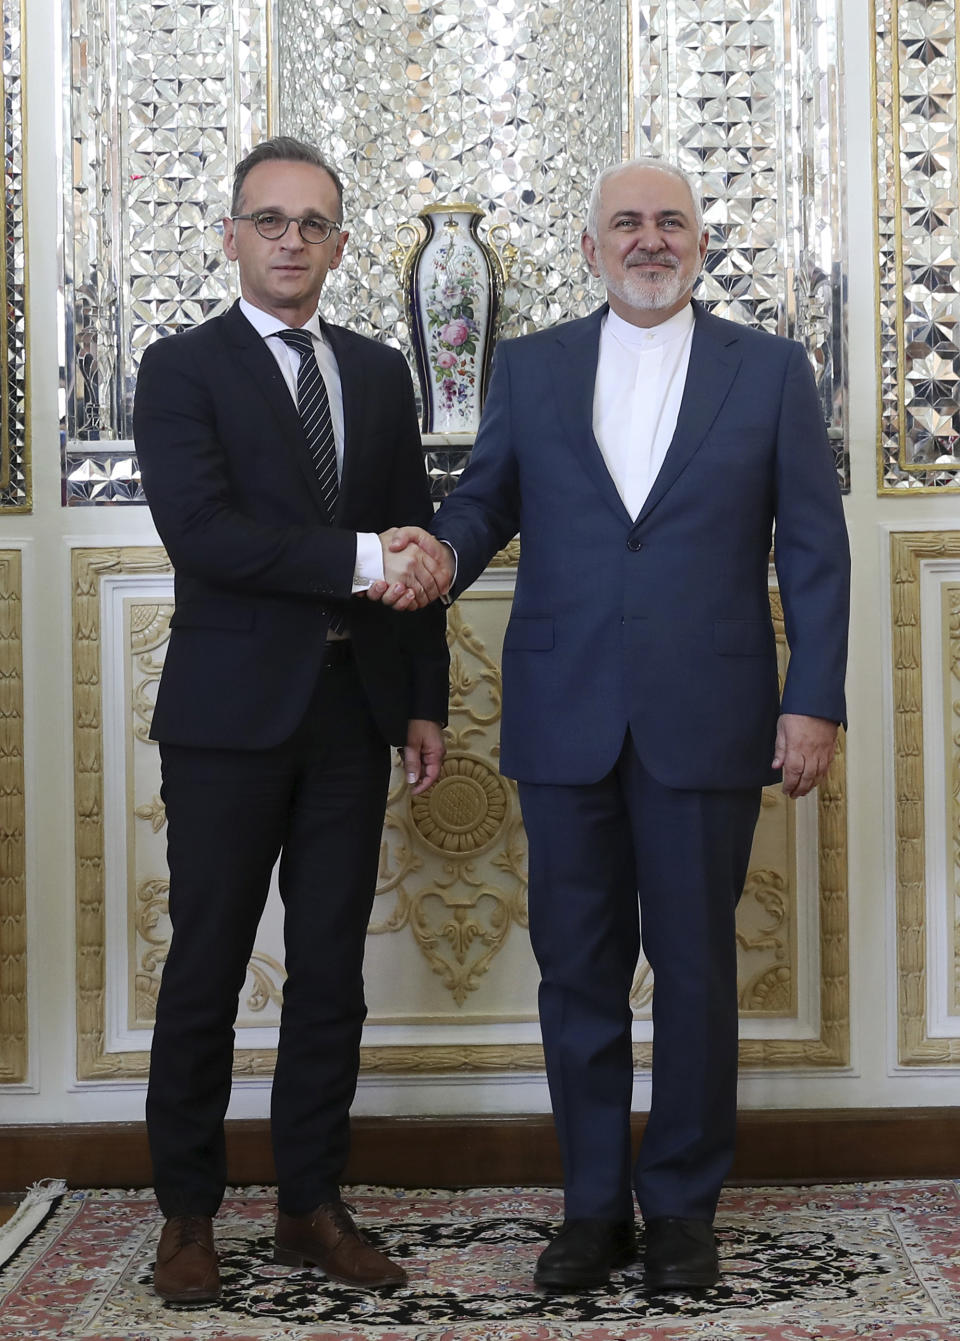 Iranian Foreign Minister Mohammad Javad Zarif, right, and his German counterpart Heiko Maas shake hands for the media prior to their meeting, in Tehran, Iran, Monday June 10, 2019. (AP Photo/Ebrahim Noroozi)